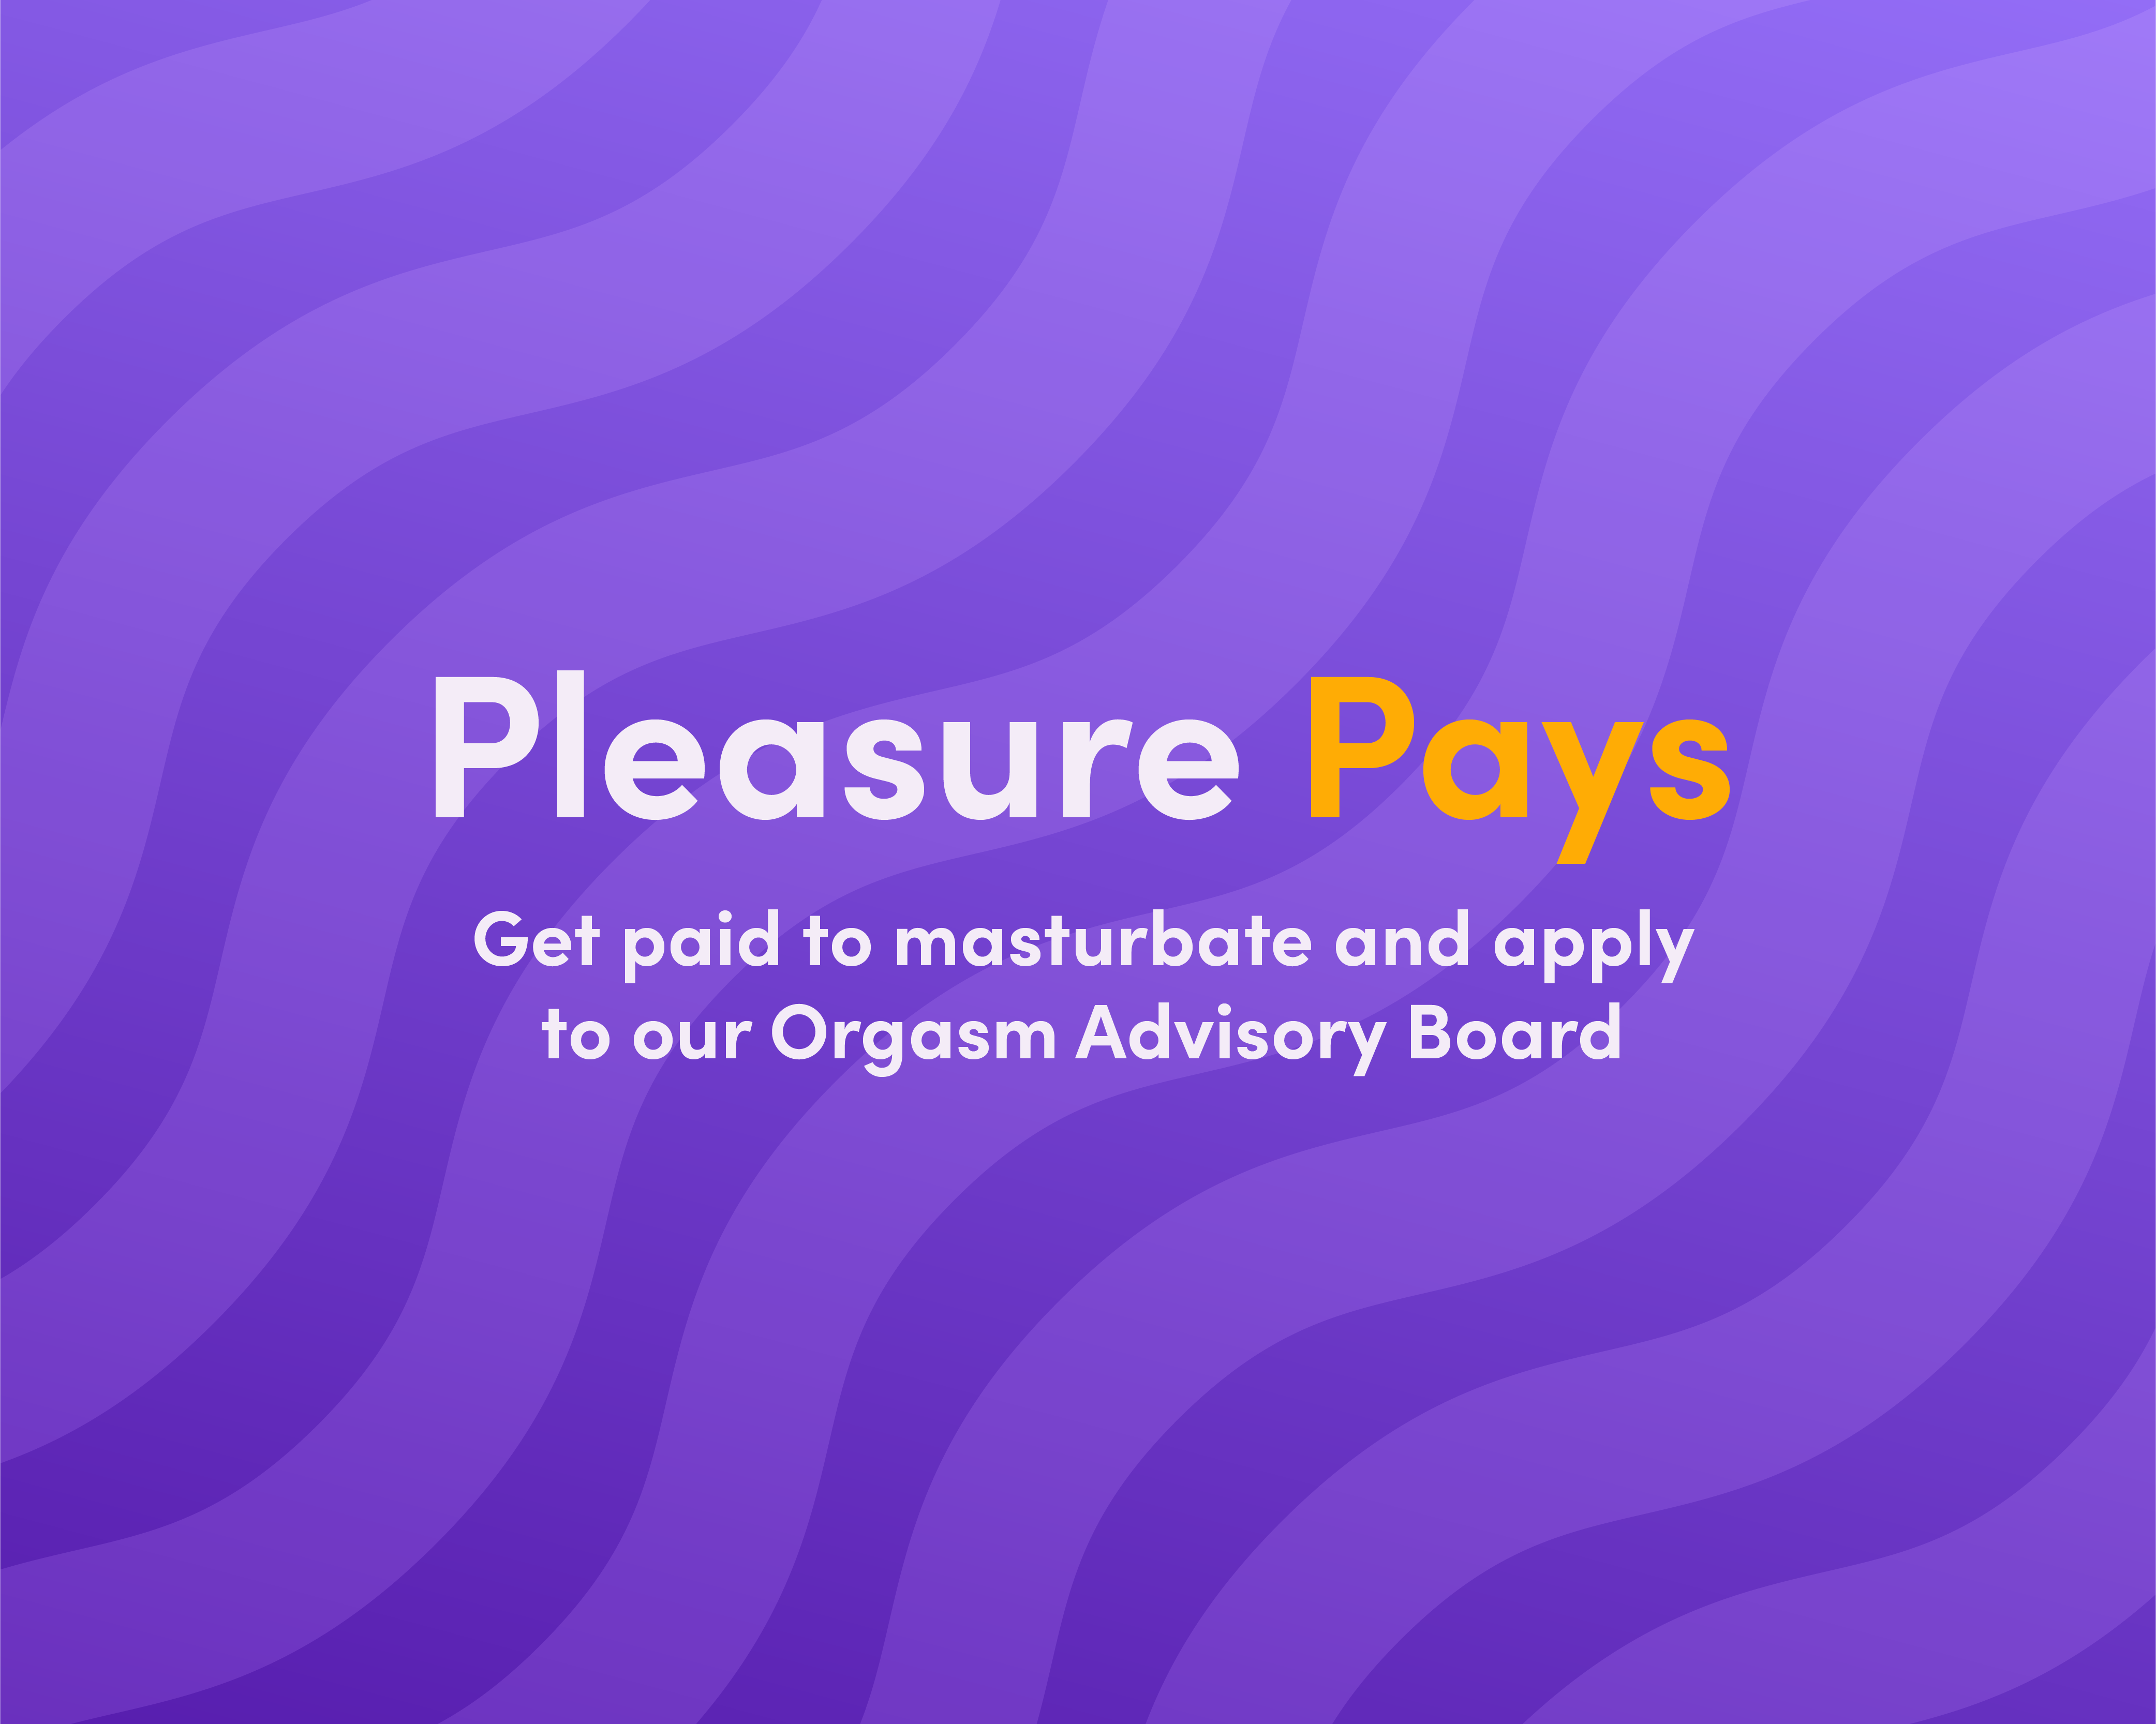 Pleasure Pays. Get paid to masturbate and apply to our Orgasm Advisory Board